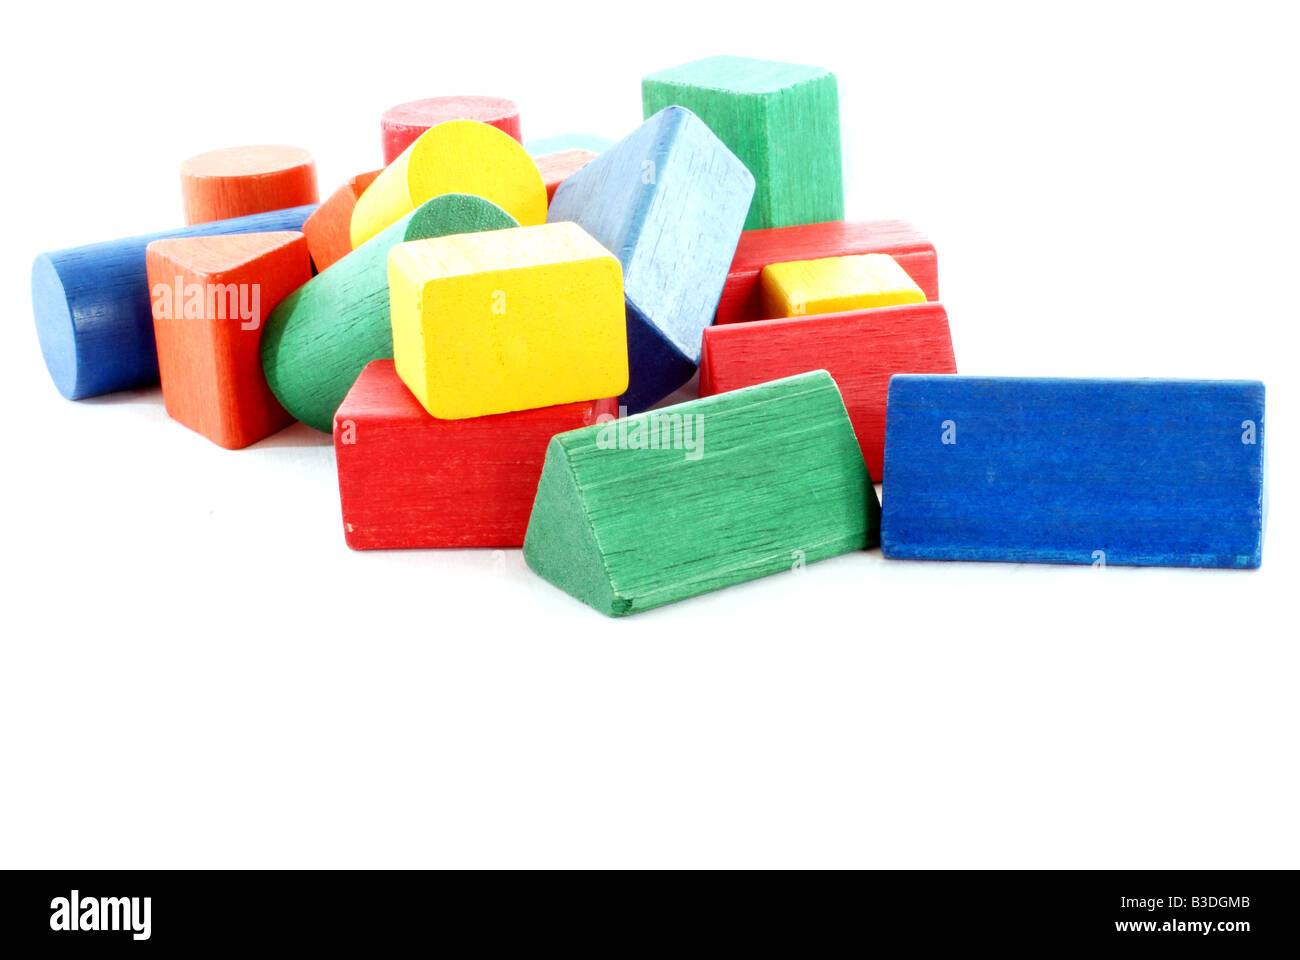 Building blocks, childrens toys and shapes Stock Photo